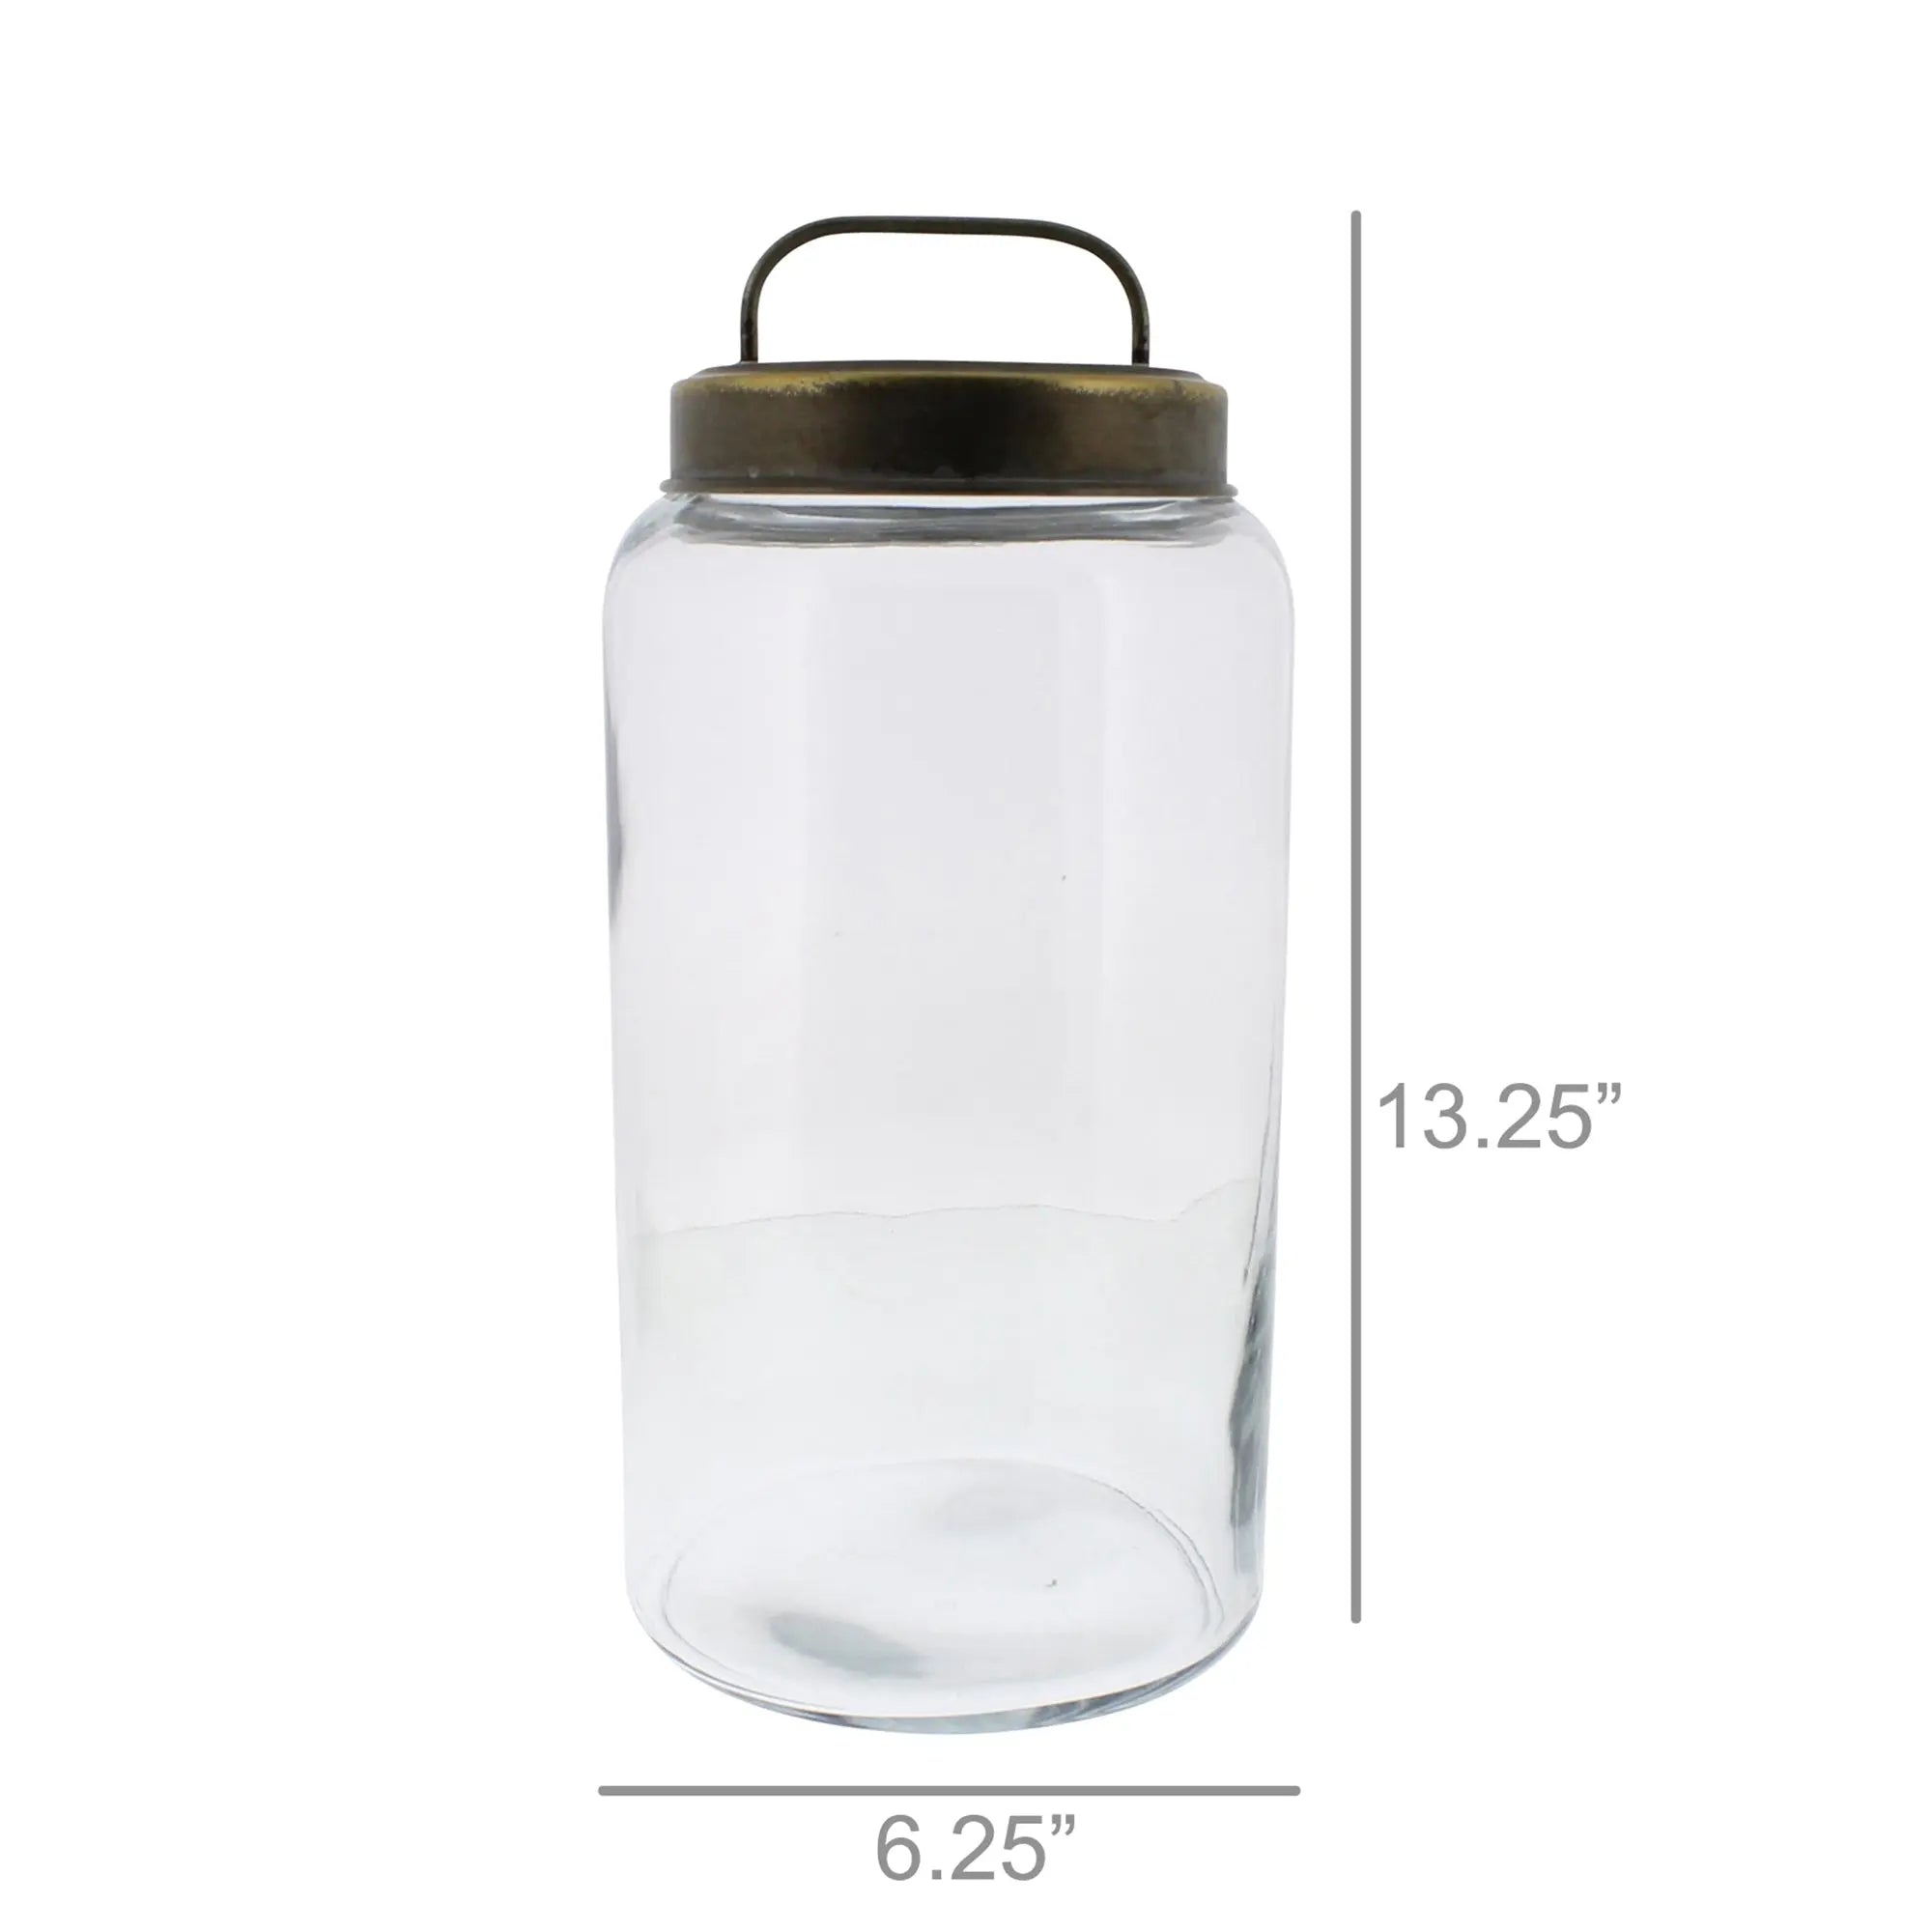 Archer Canisters with Metal Lids - Home Smith